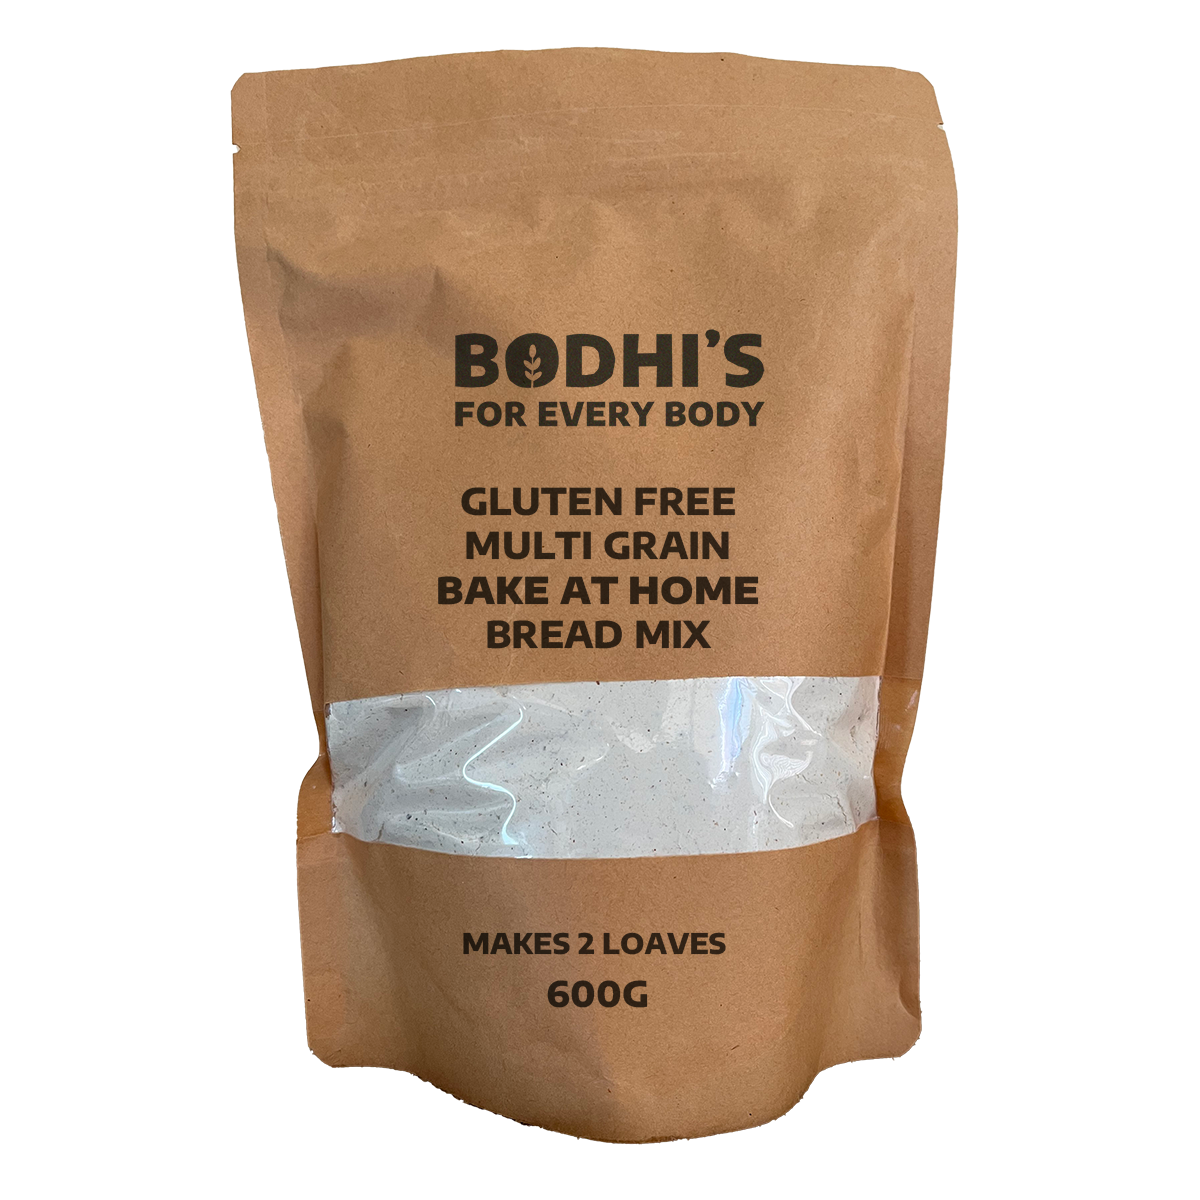 A photo of Bodhi's Gluten Free Multigrain Bake at Home Mix